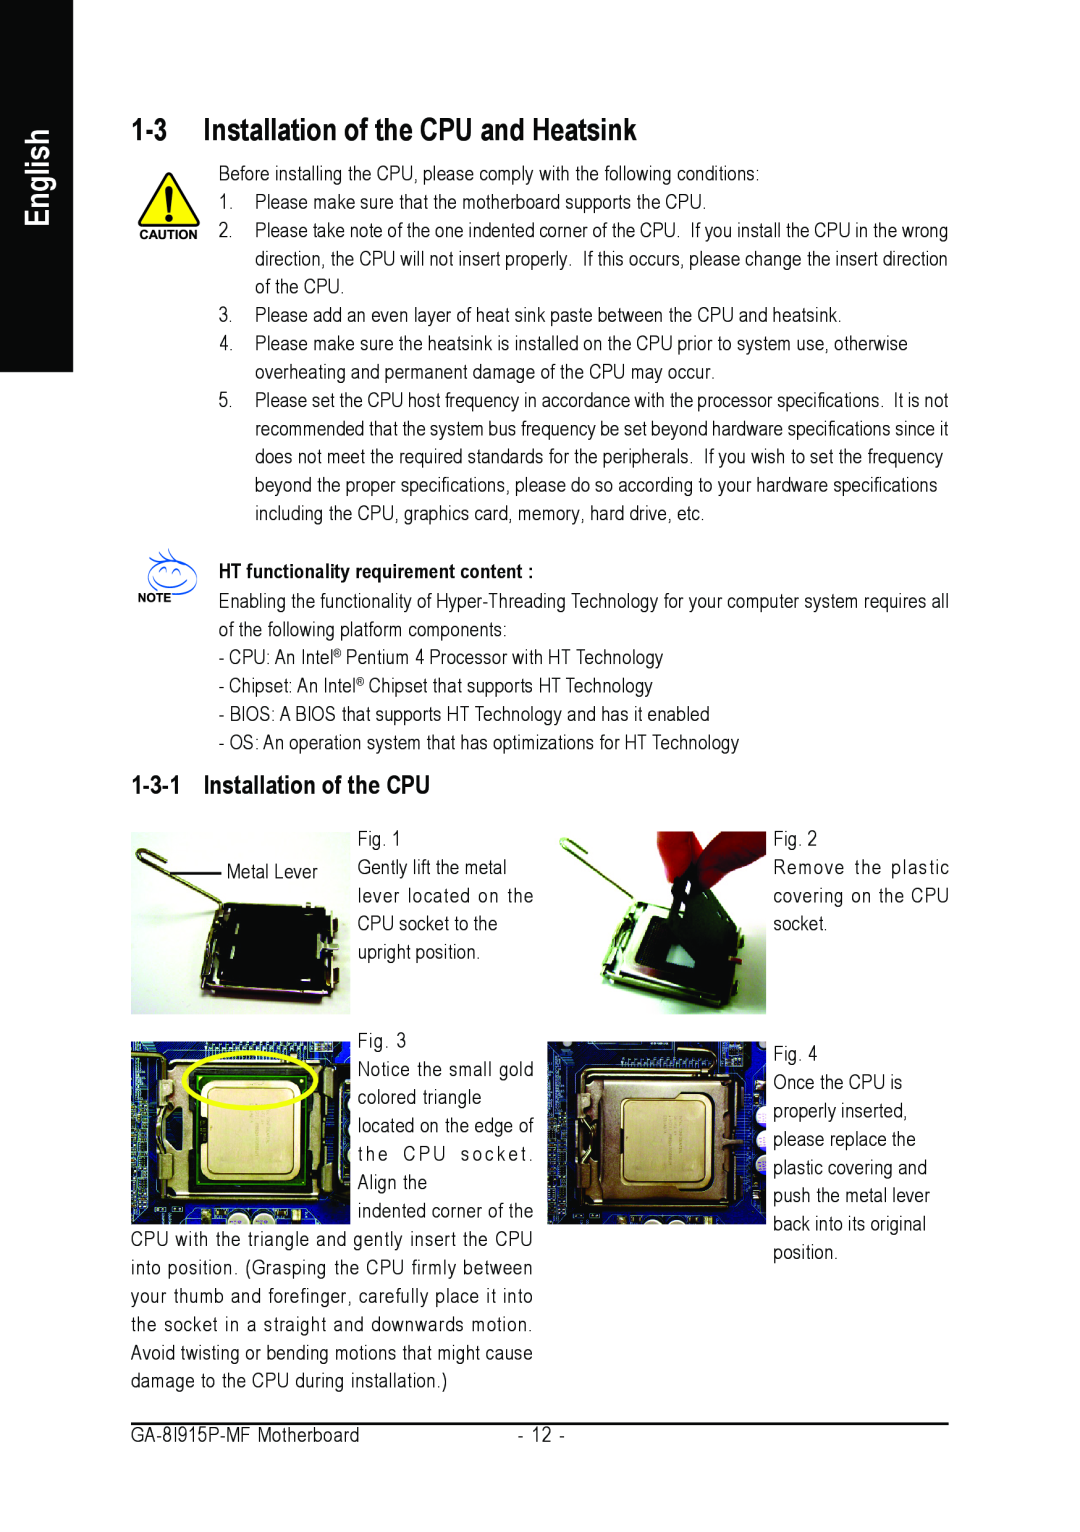 Gigabyte GA-8I915P-MF user manual Installation of the CPU and Heatsink, English, HT functionality requirement content 